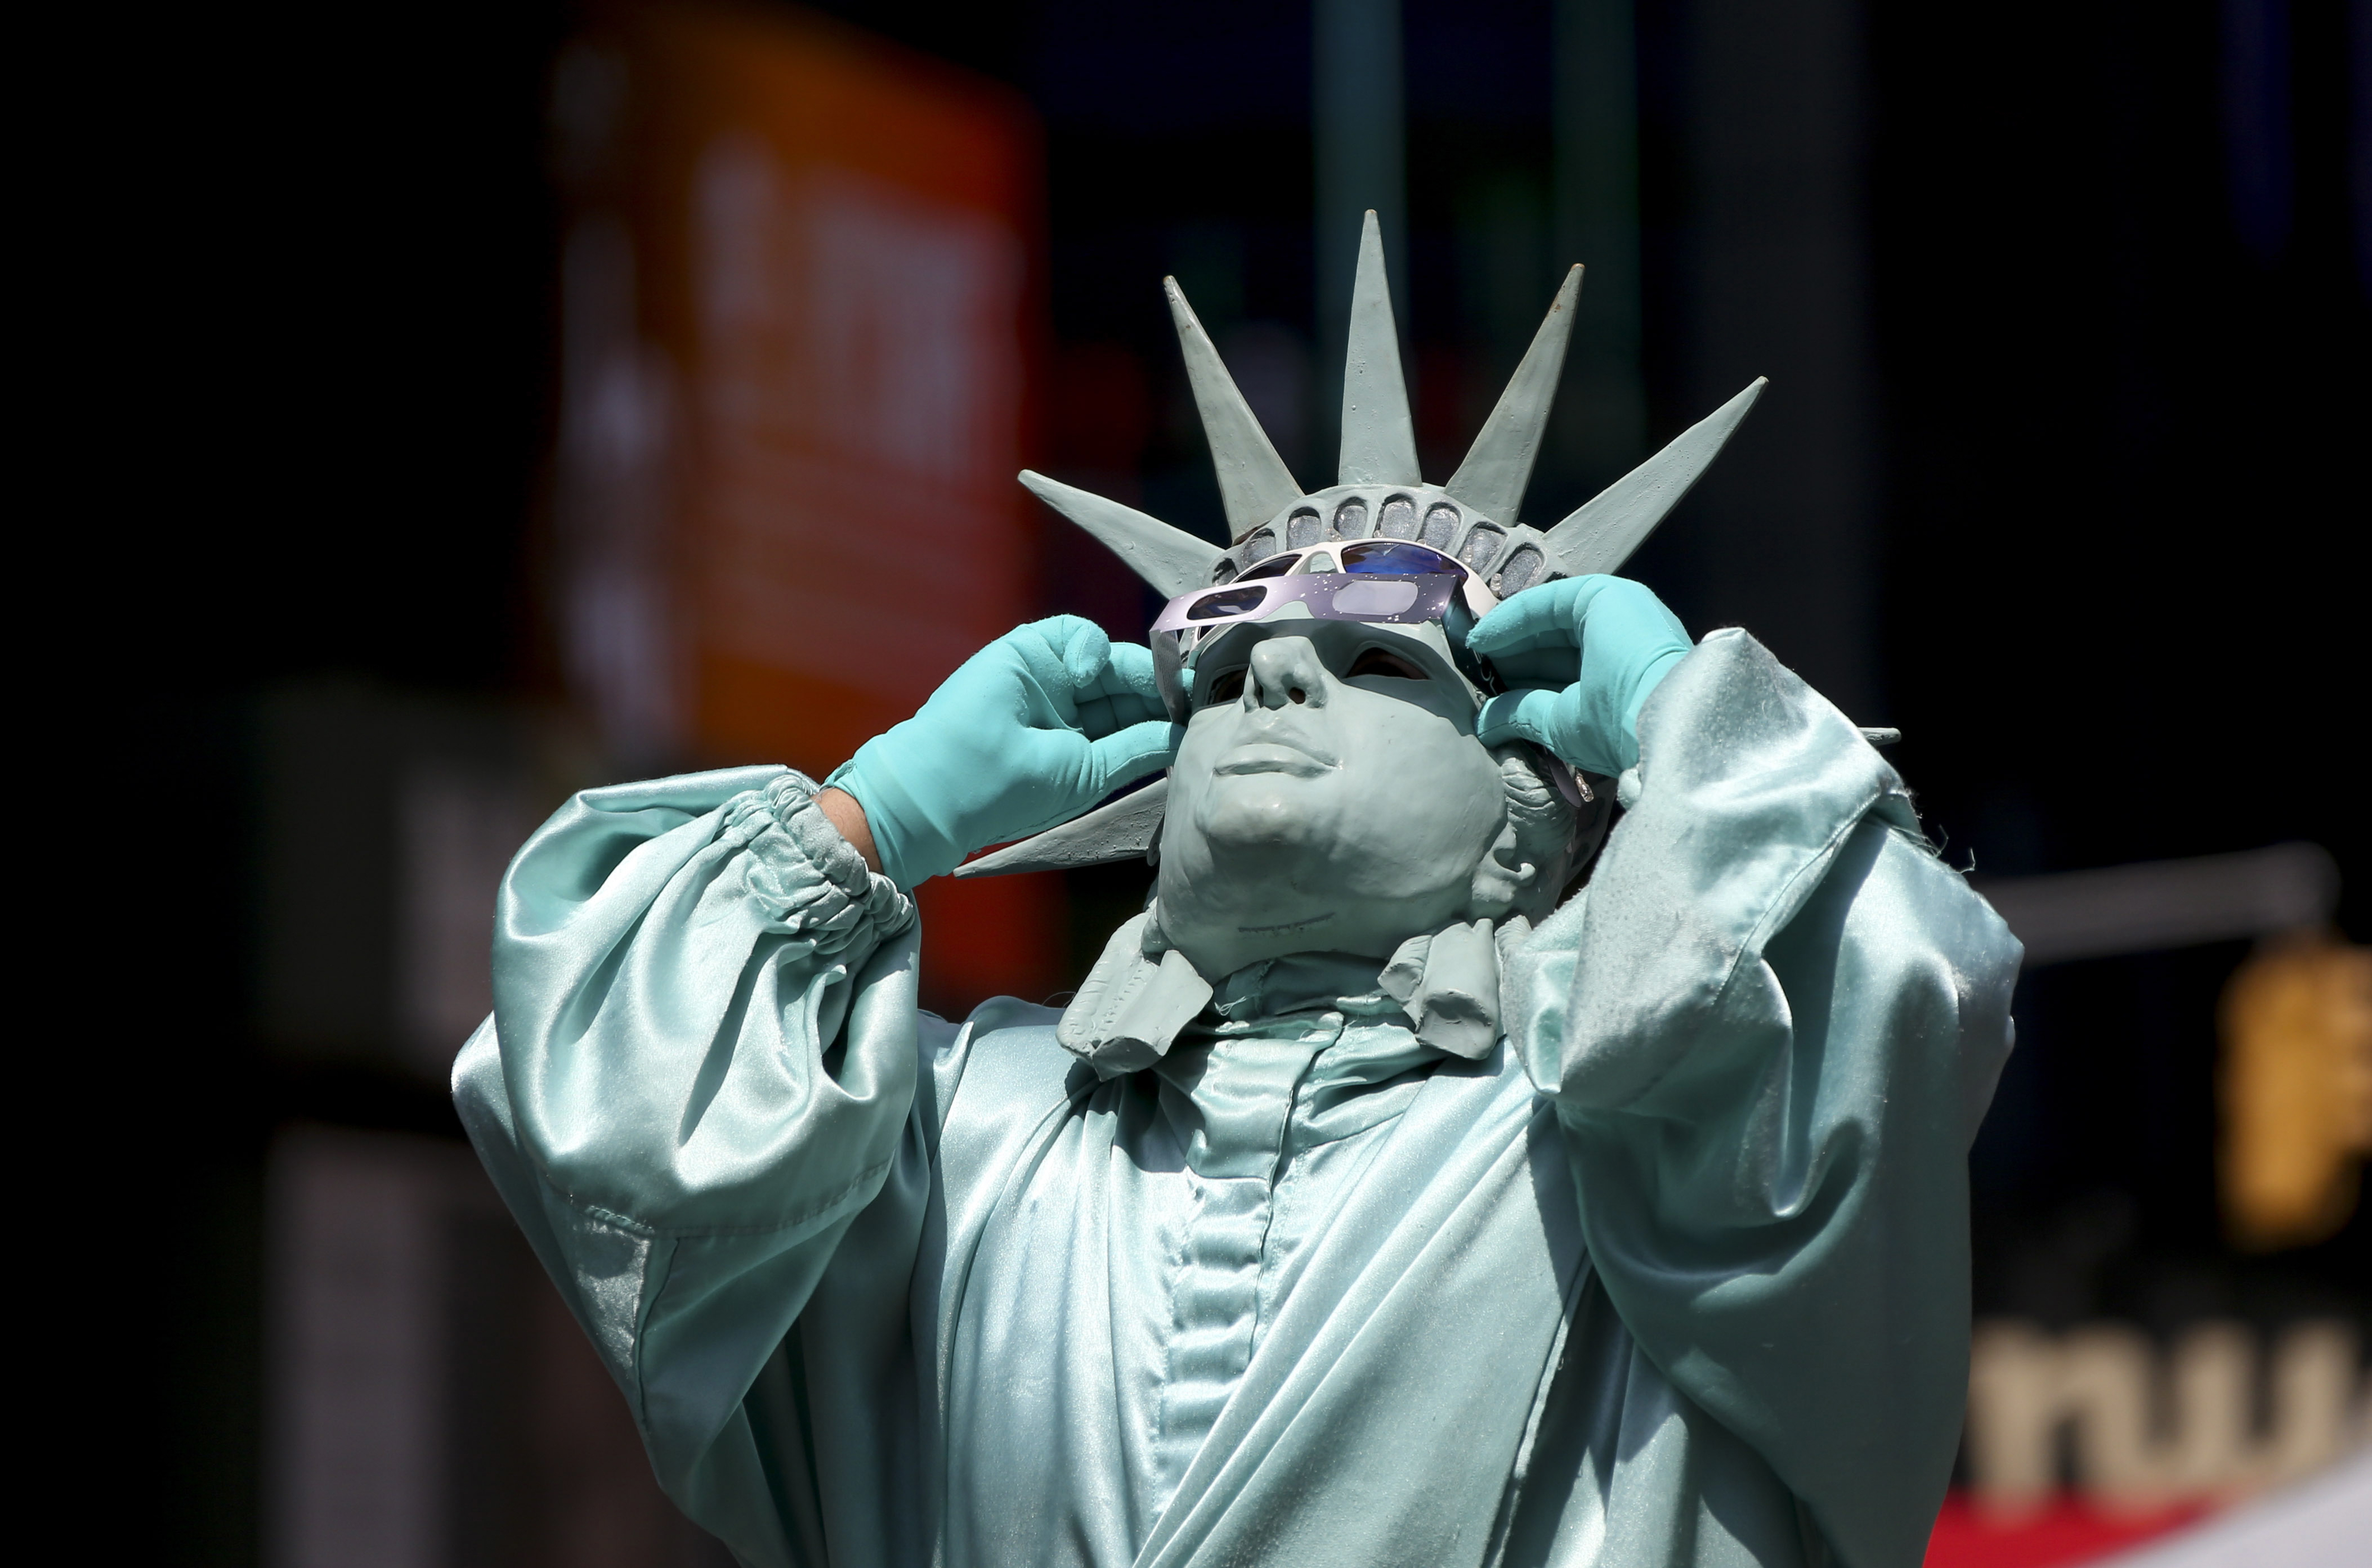 Person dressed as the Statue of Liberty with sunglasses adjusting their crown